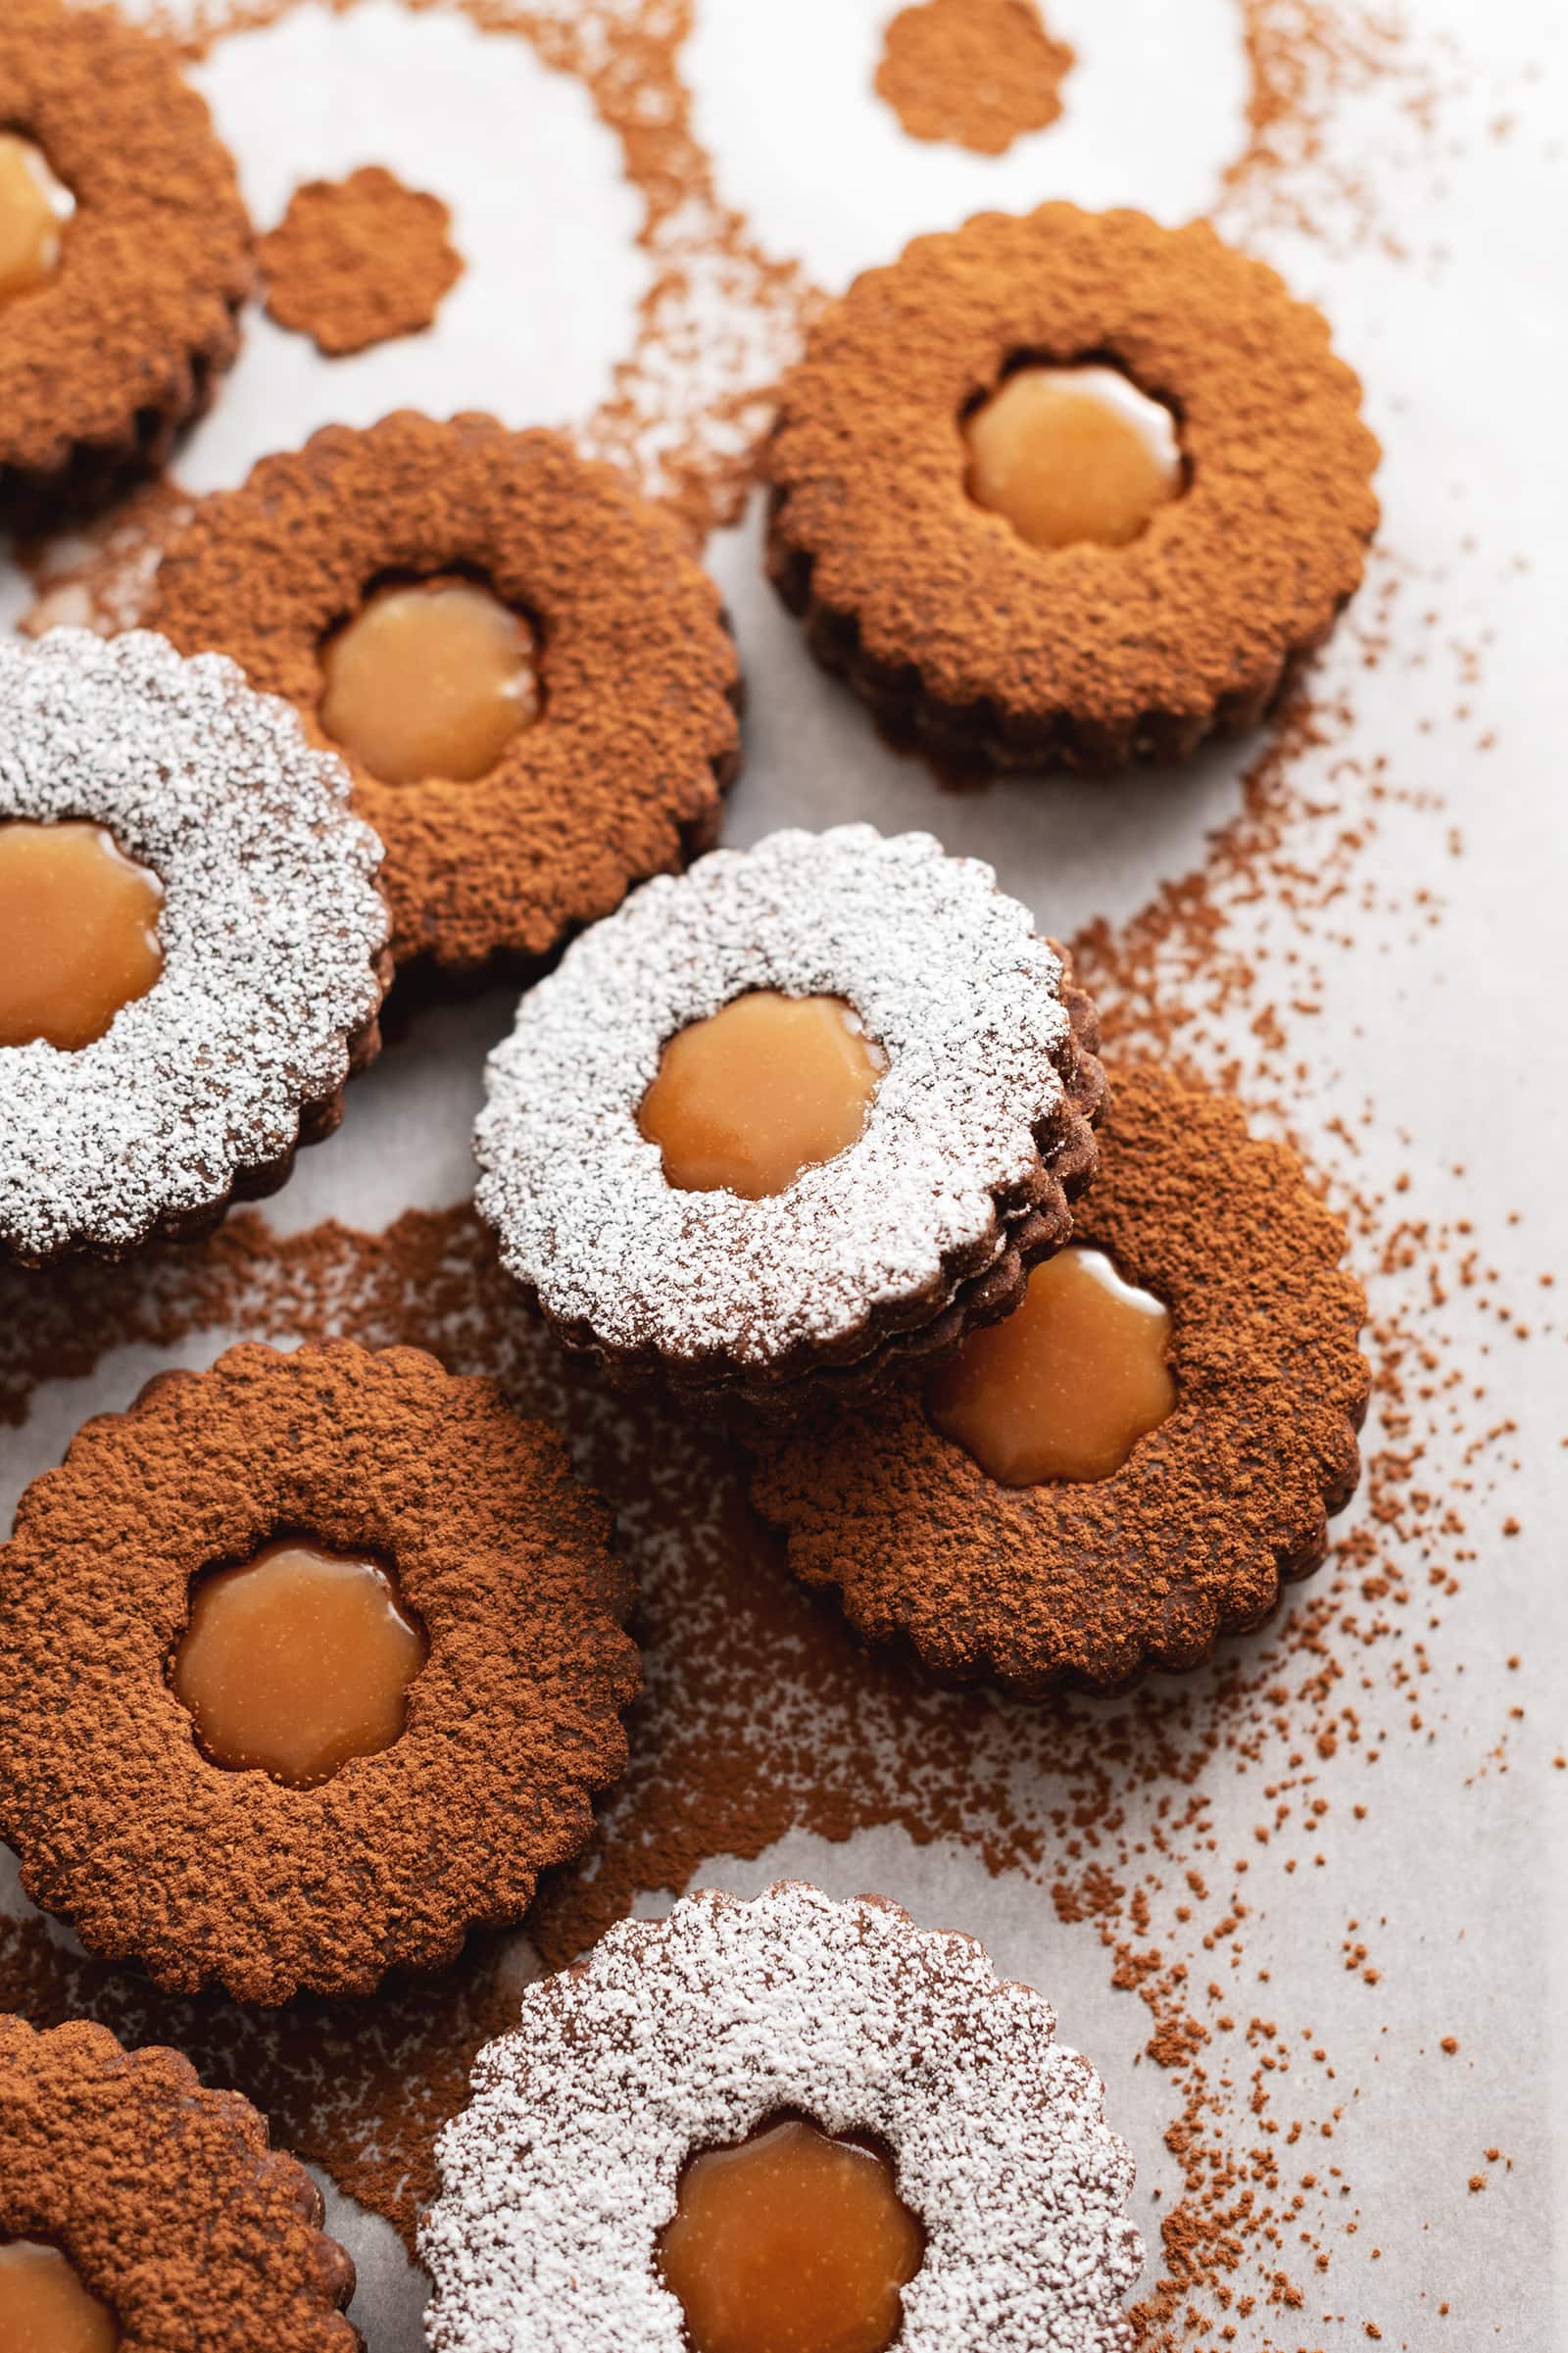 A linzer cookie dusted with powdered sugar resting on another cookie dusted with cocoa powder.